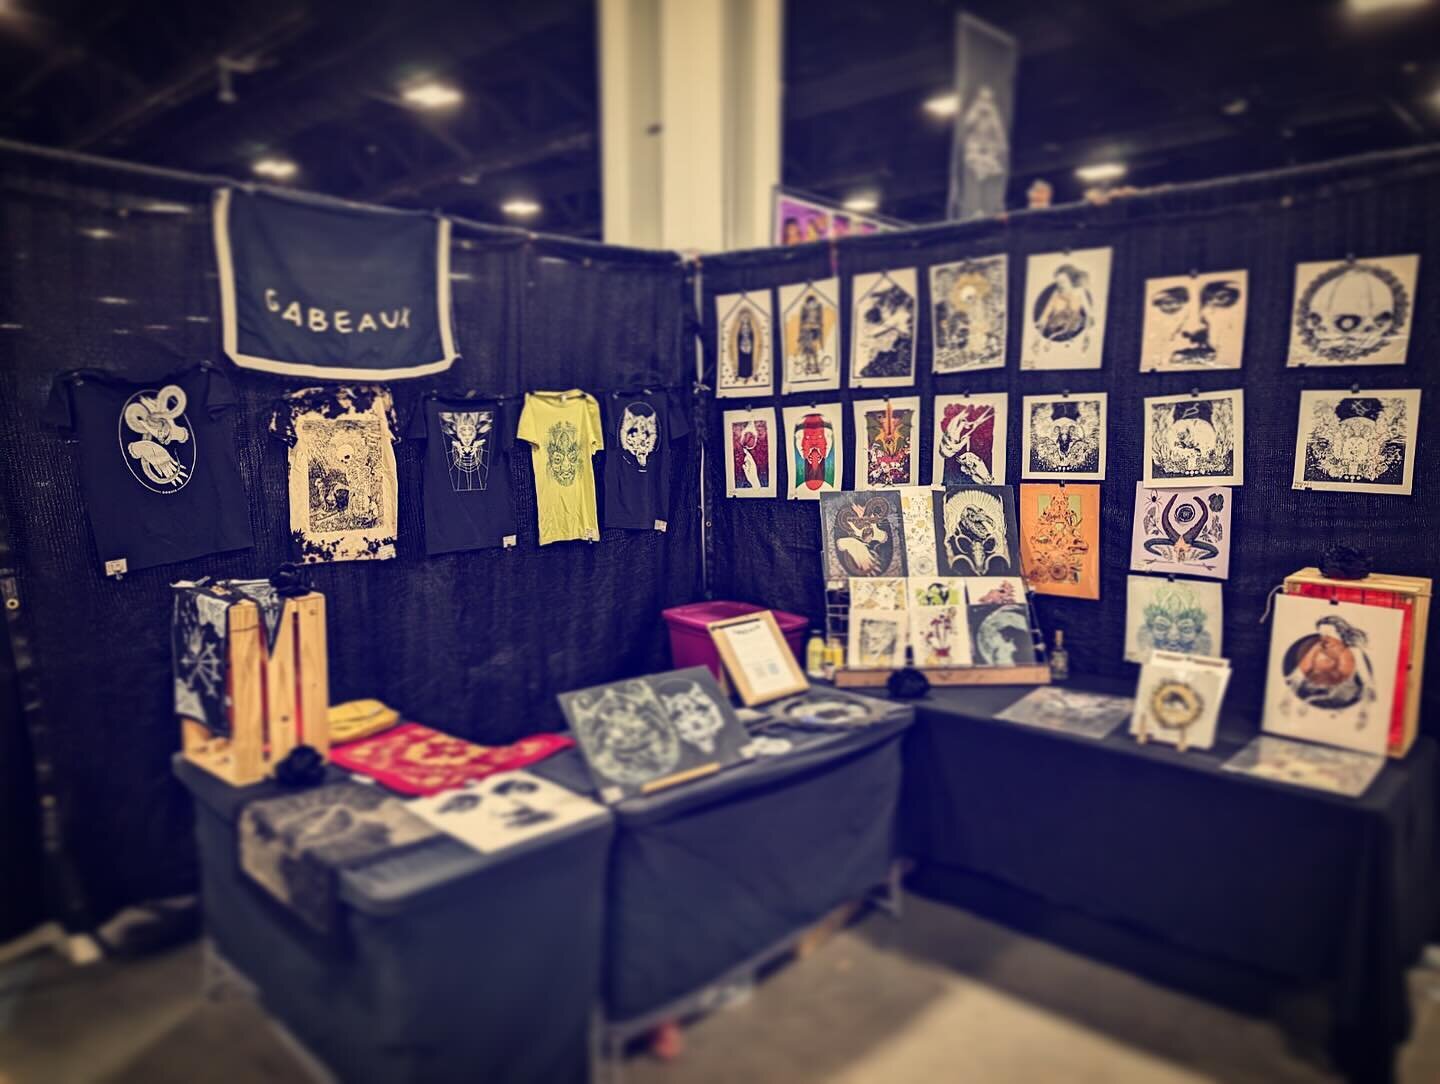 Hello @odditiesandcuriositiesexpo Charlotte! We&rsquo;re excited to get weird with you 🦇💀⛓️ come check out our hand pulled prints, apparel and more and say hello to the magnanimous @vivalaverdeatl and @payneography y&rsquo;all are the literal best 